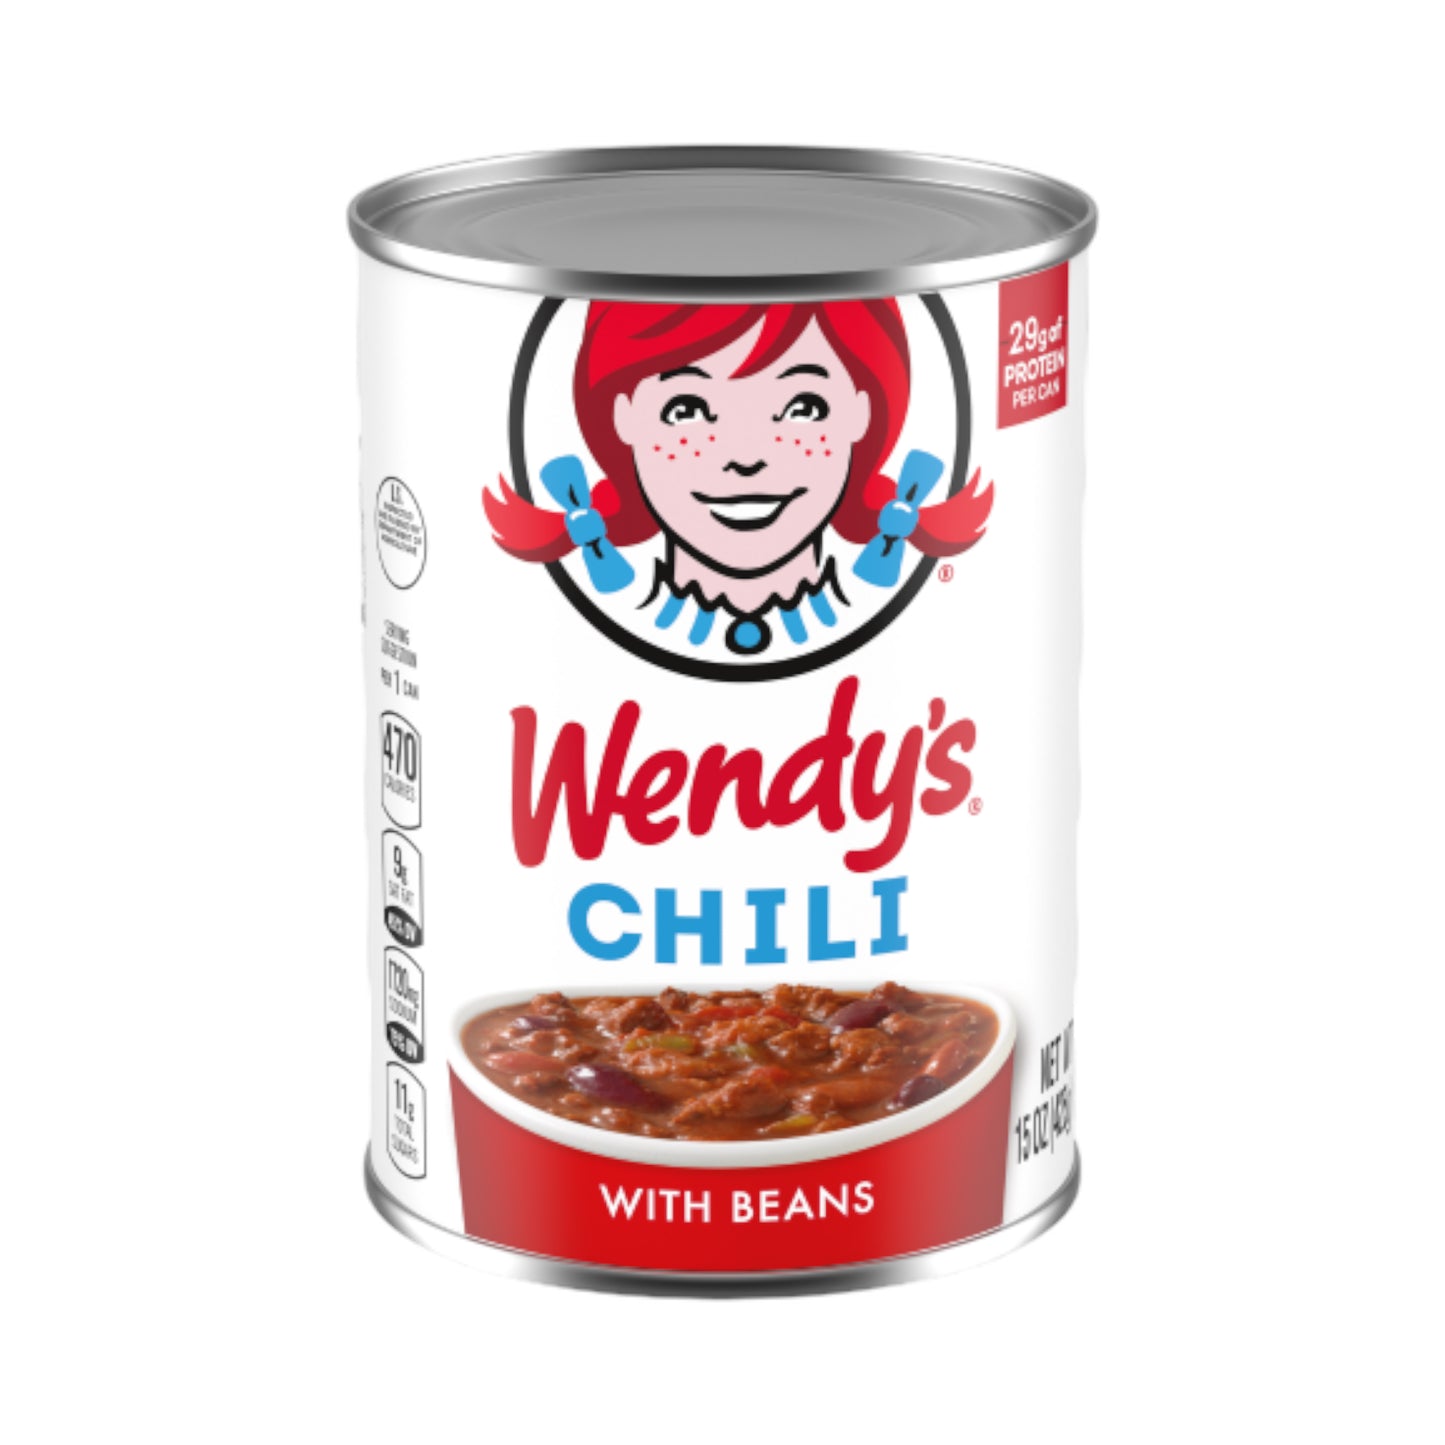 Wendy’s Canned Chili with Beans - 15 oz (425g)